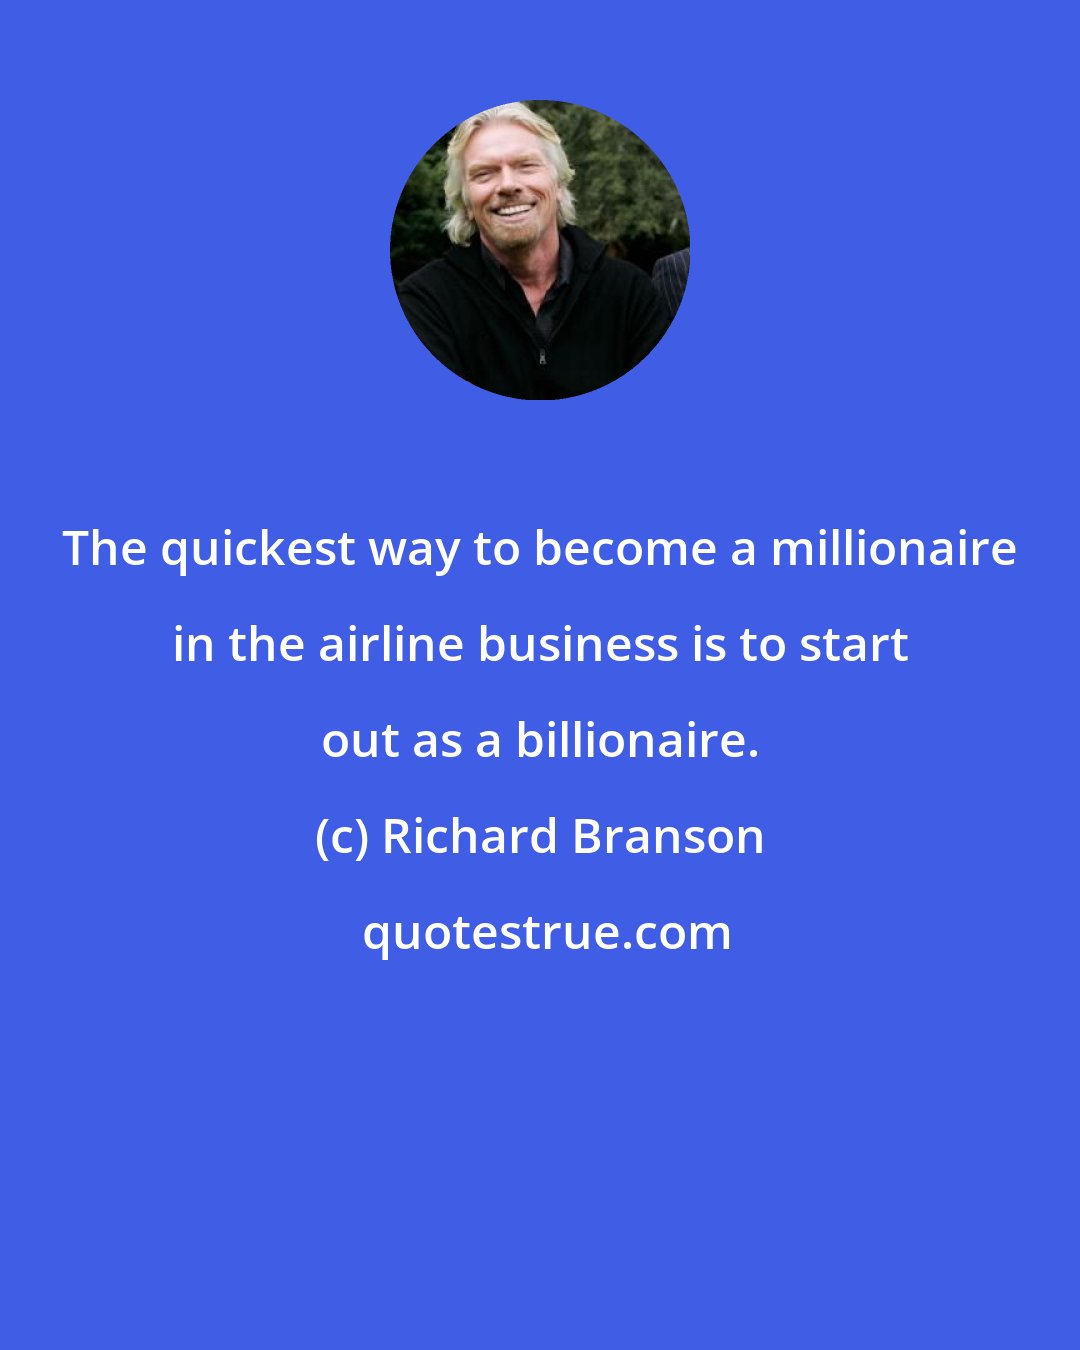 Richard Branson: The quickest way to become a millionaire in the airline business is to start out as a billionaire.